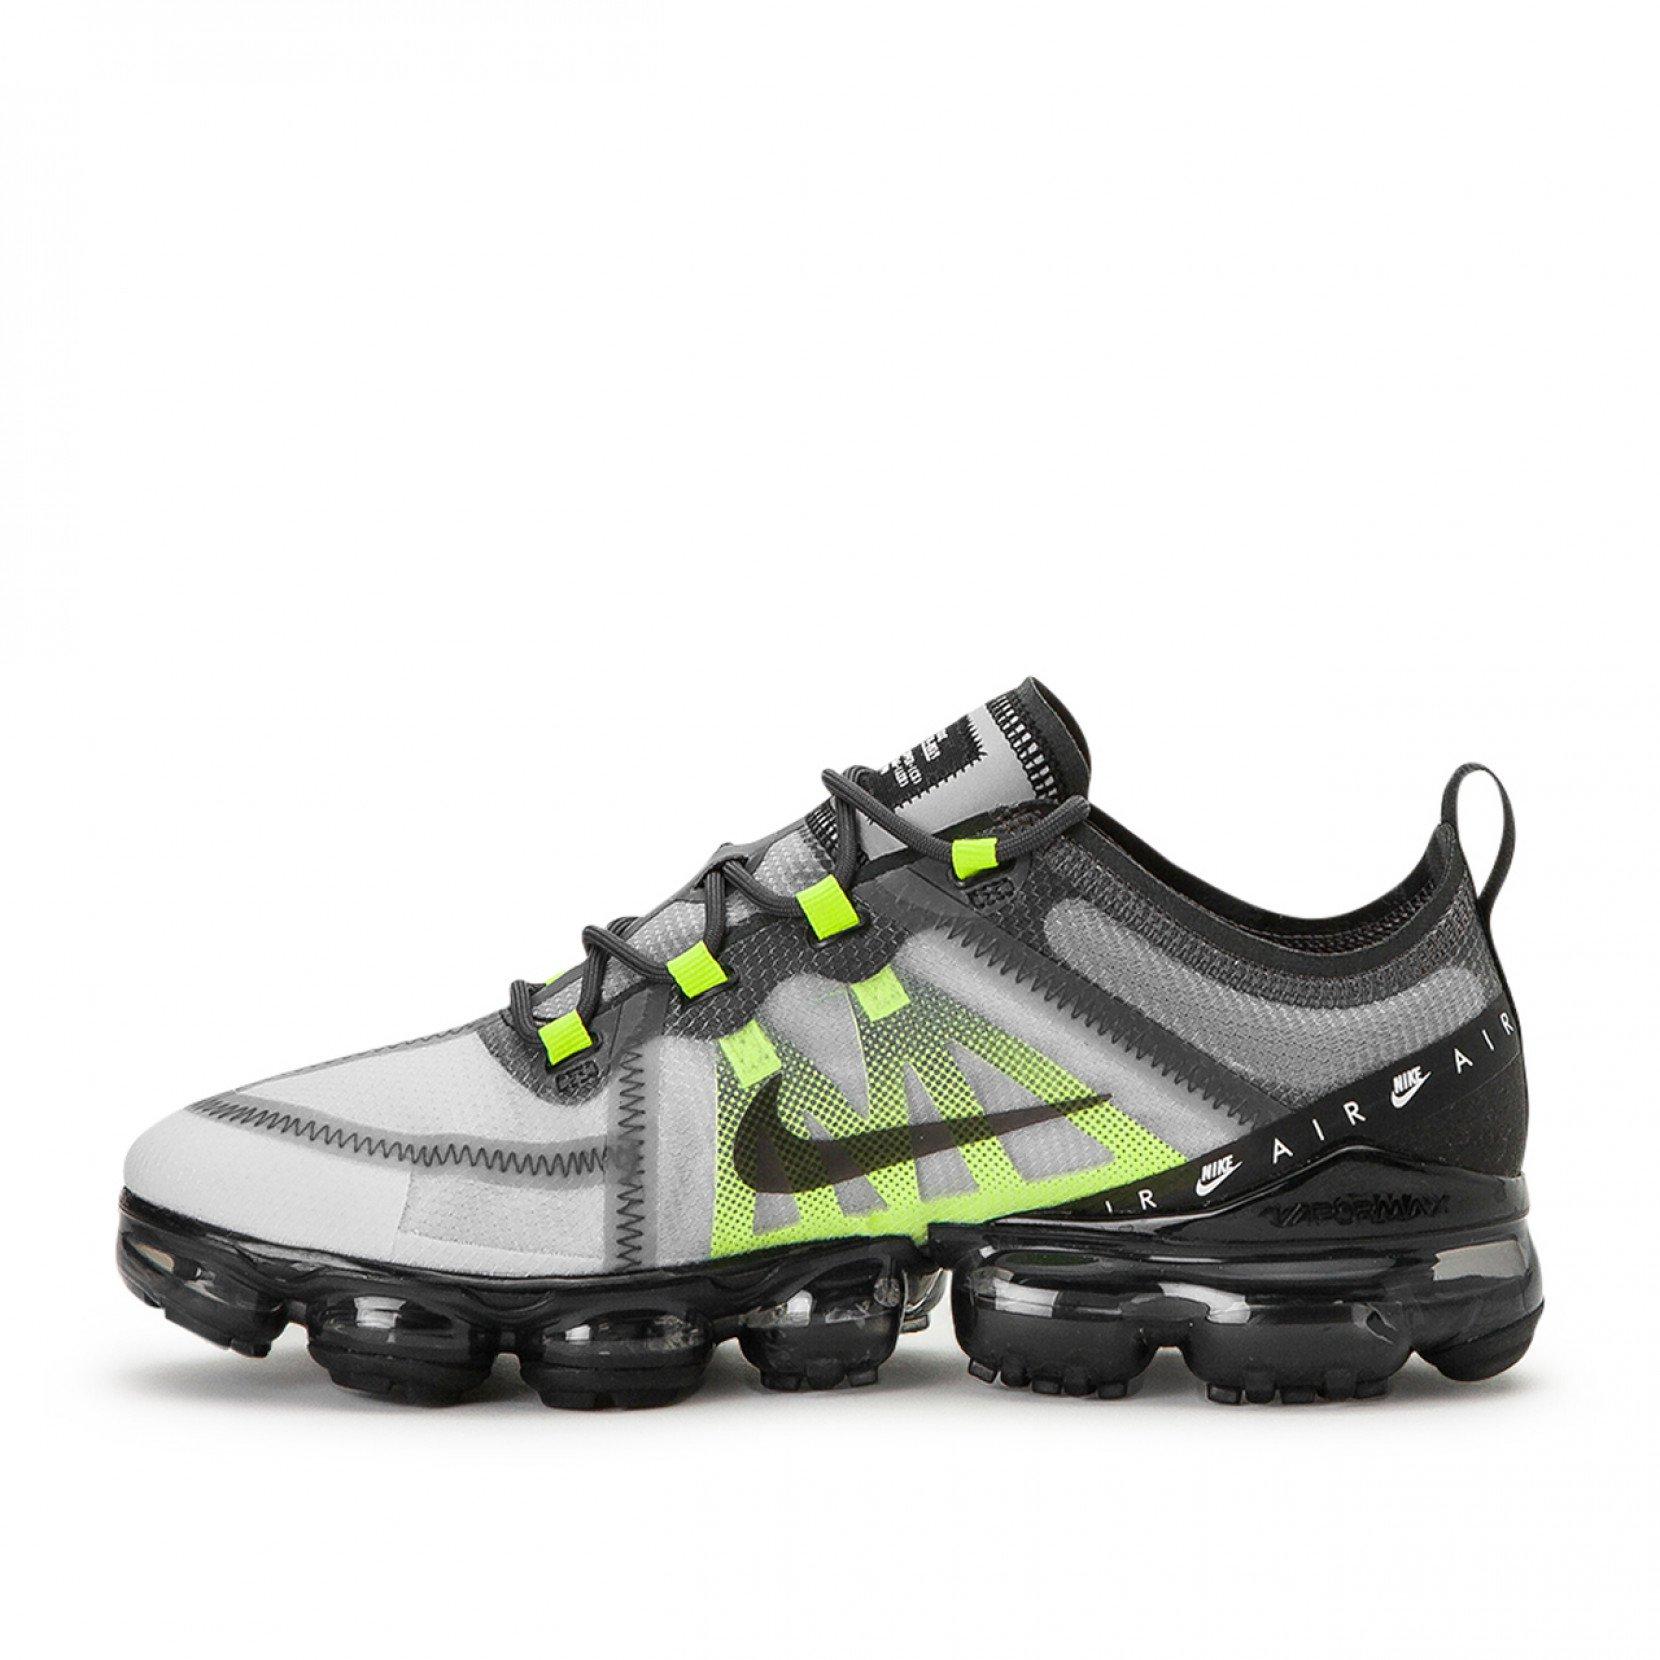 Nike Synthetic Air Vapormax 2019 Lx in Grey (Gray) for Men - Lyst